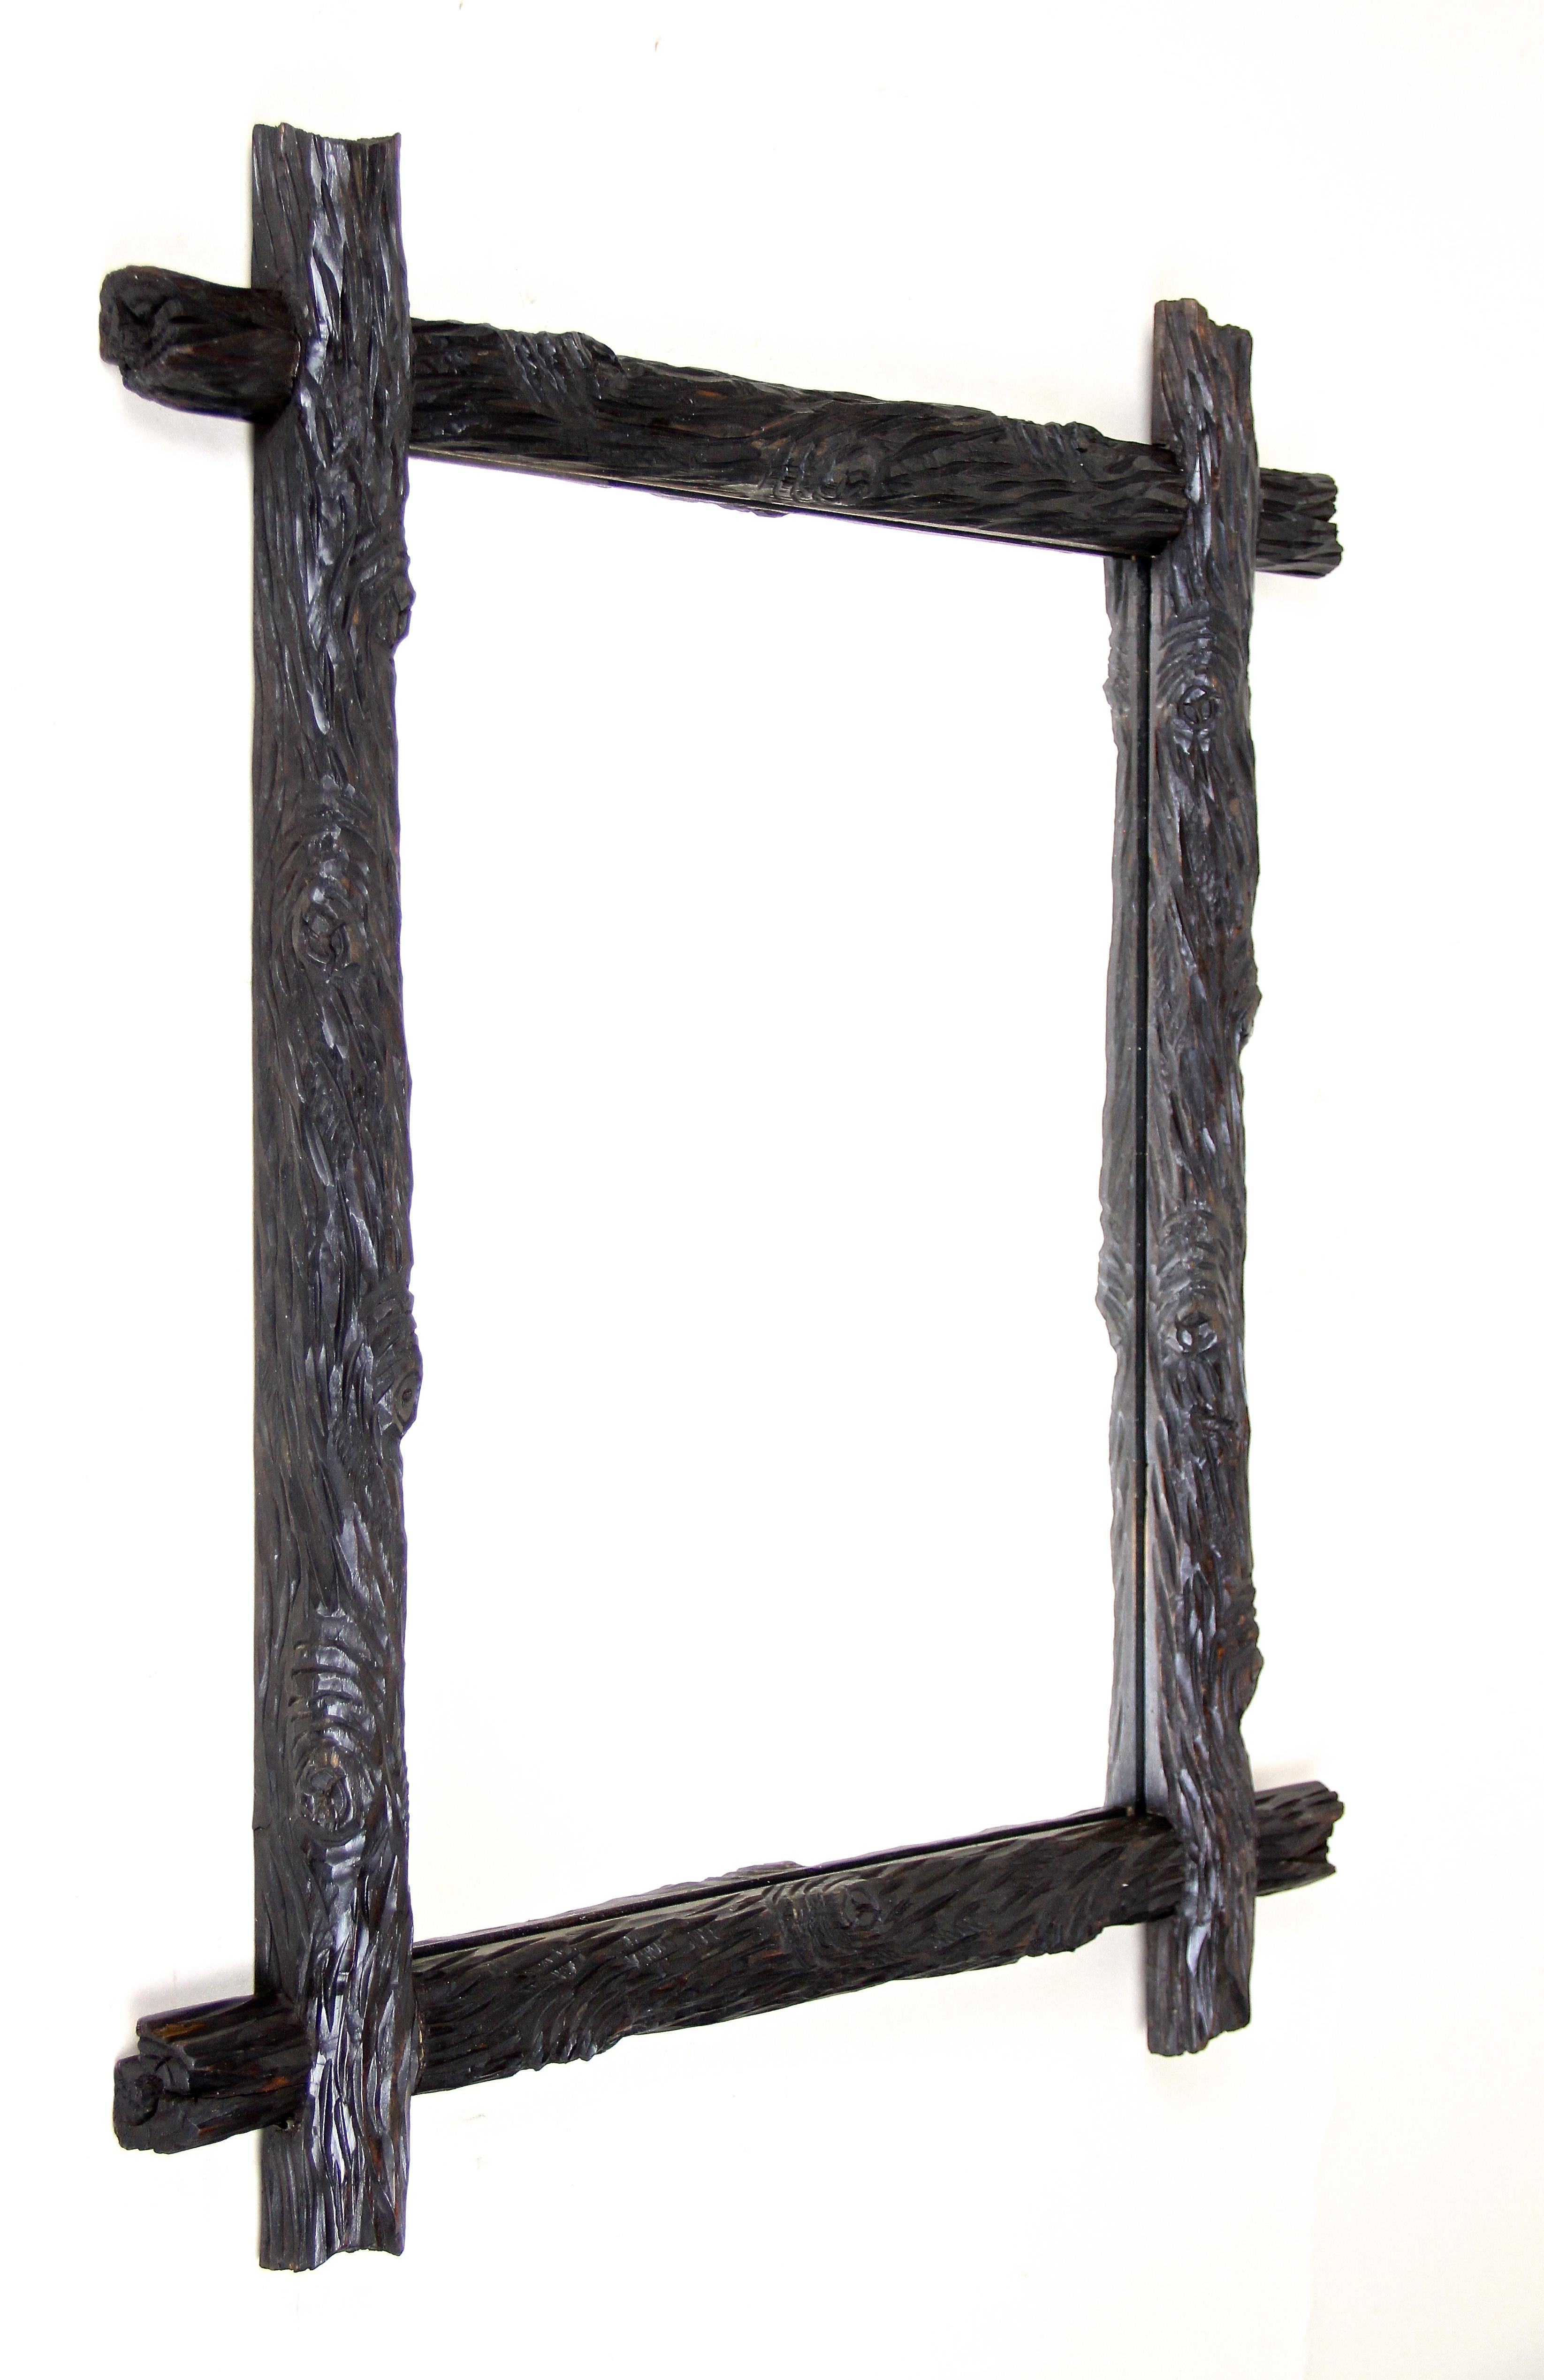 Out of Austria from circa 1870 comes this unique artfully hand carved Black Forest mirror, impressing with an unusual 